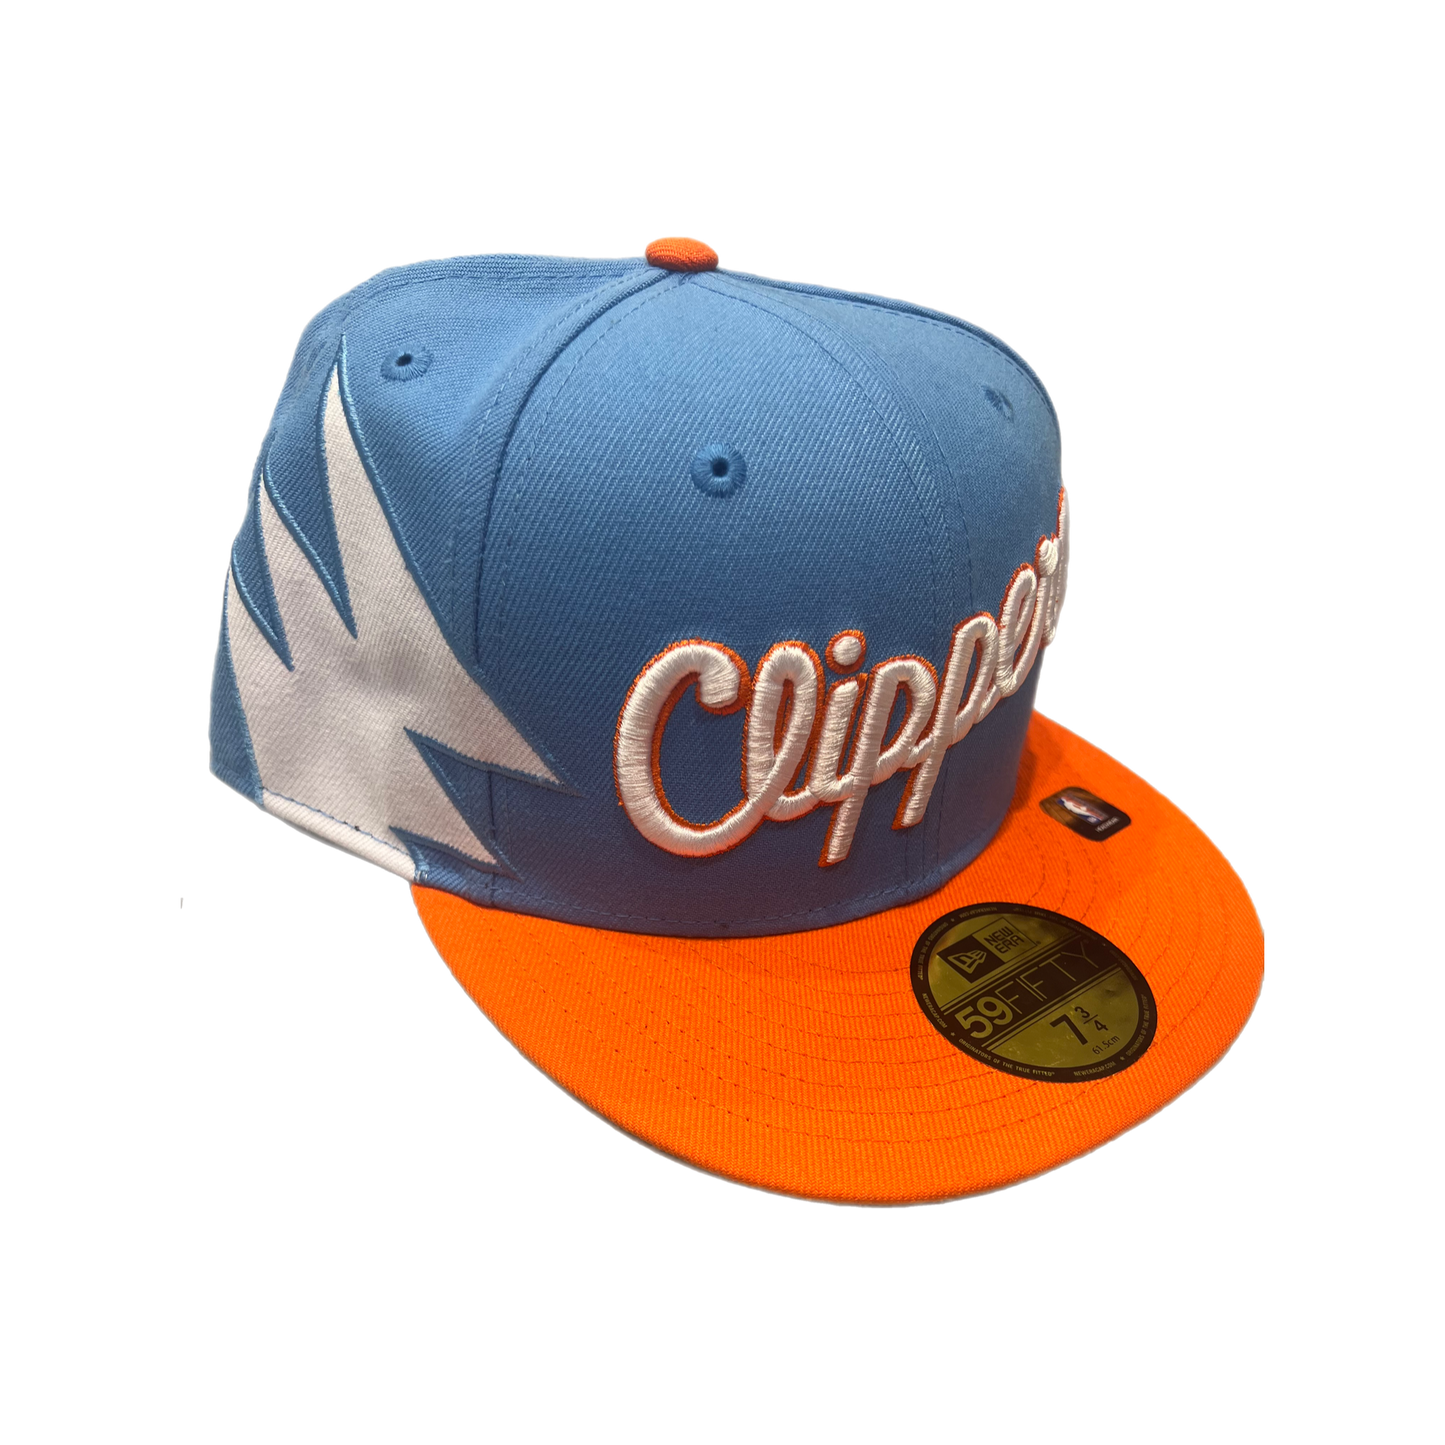 NBA - "Clippers Fitted" - Size 7 3/4